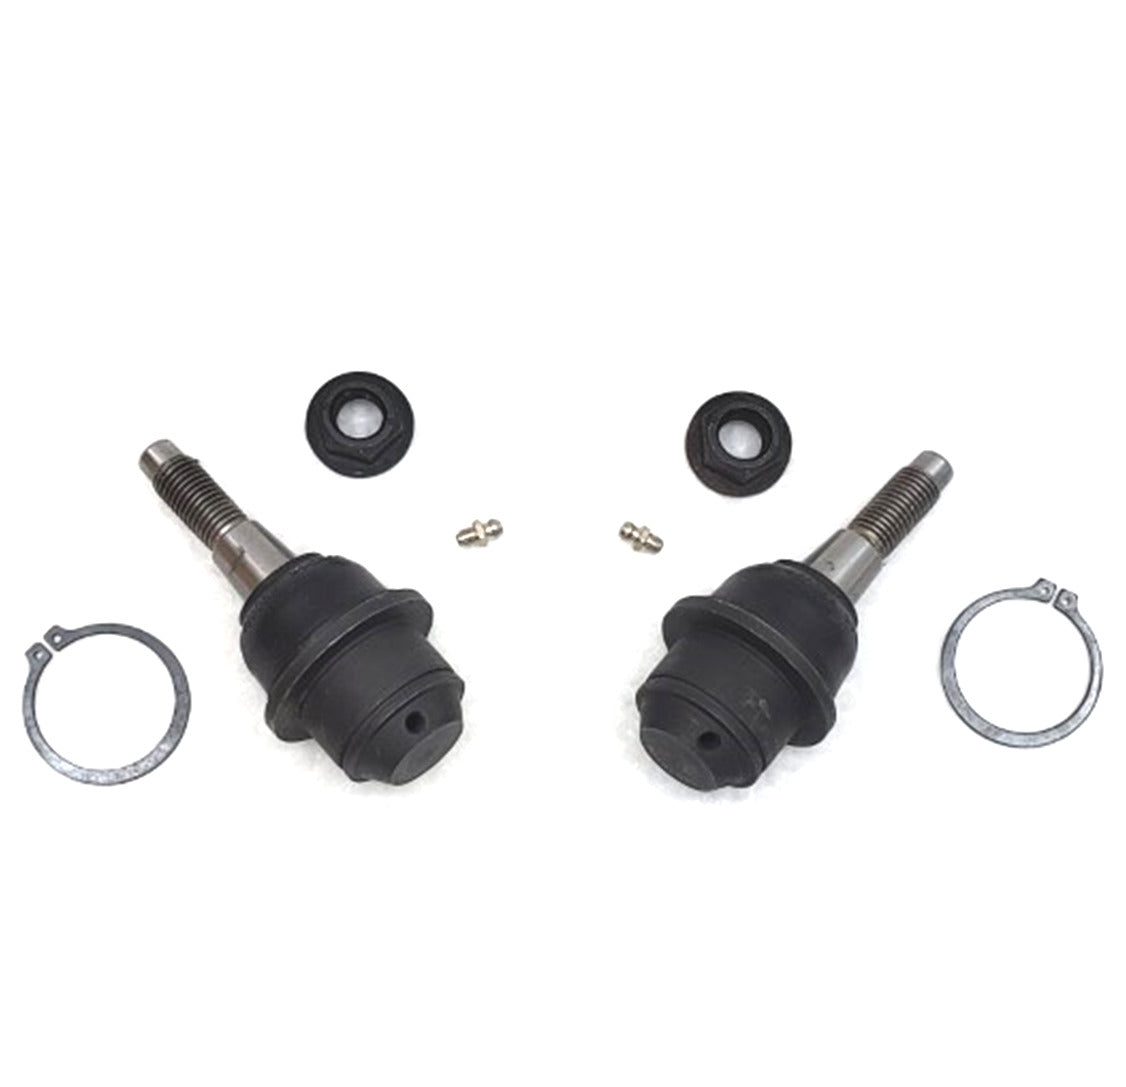 Lifetime Lower Ball Joint Suspension Kit for 2014-2018 Cadillac, Chevrolet, GMC